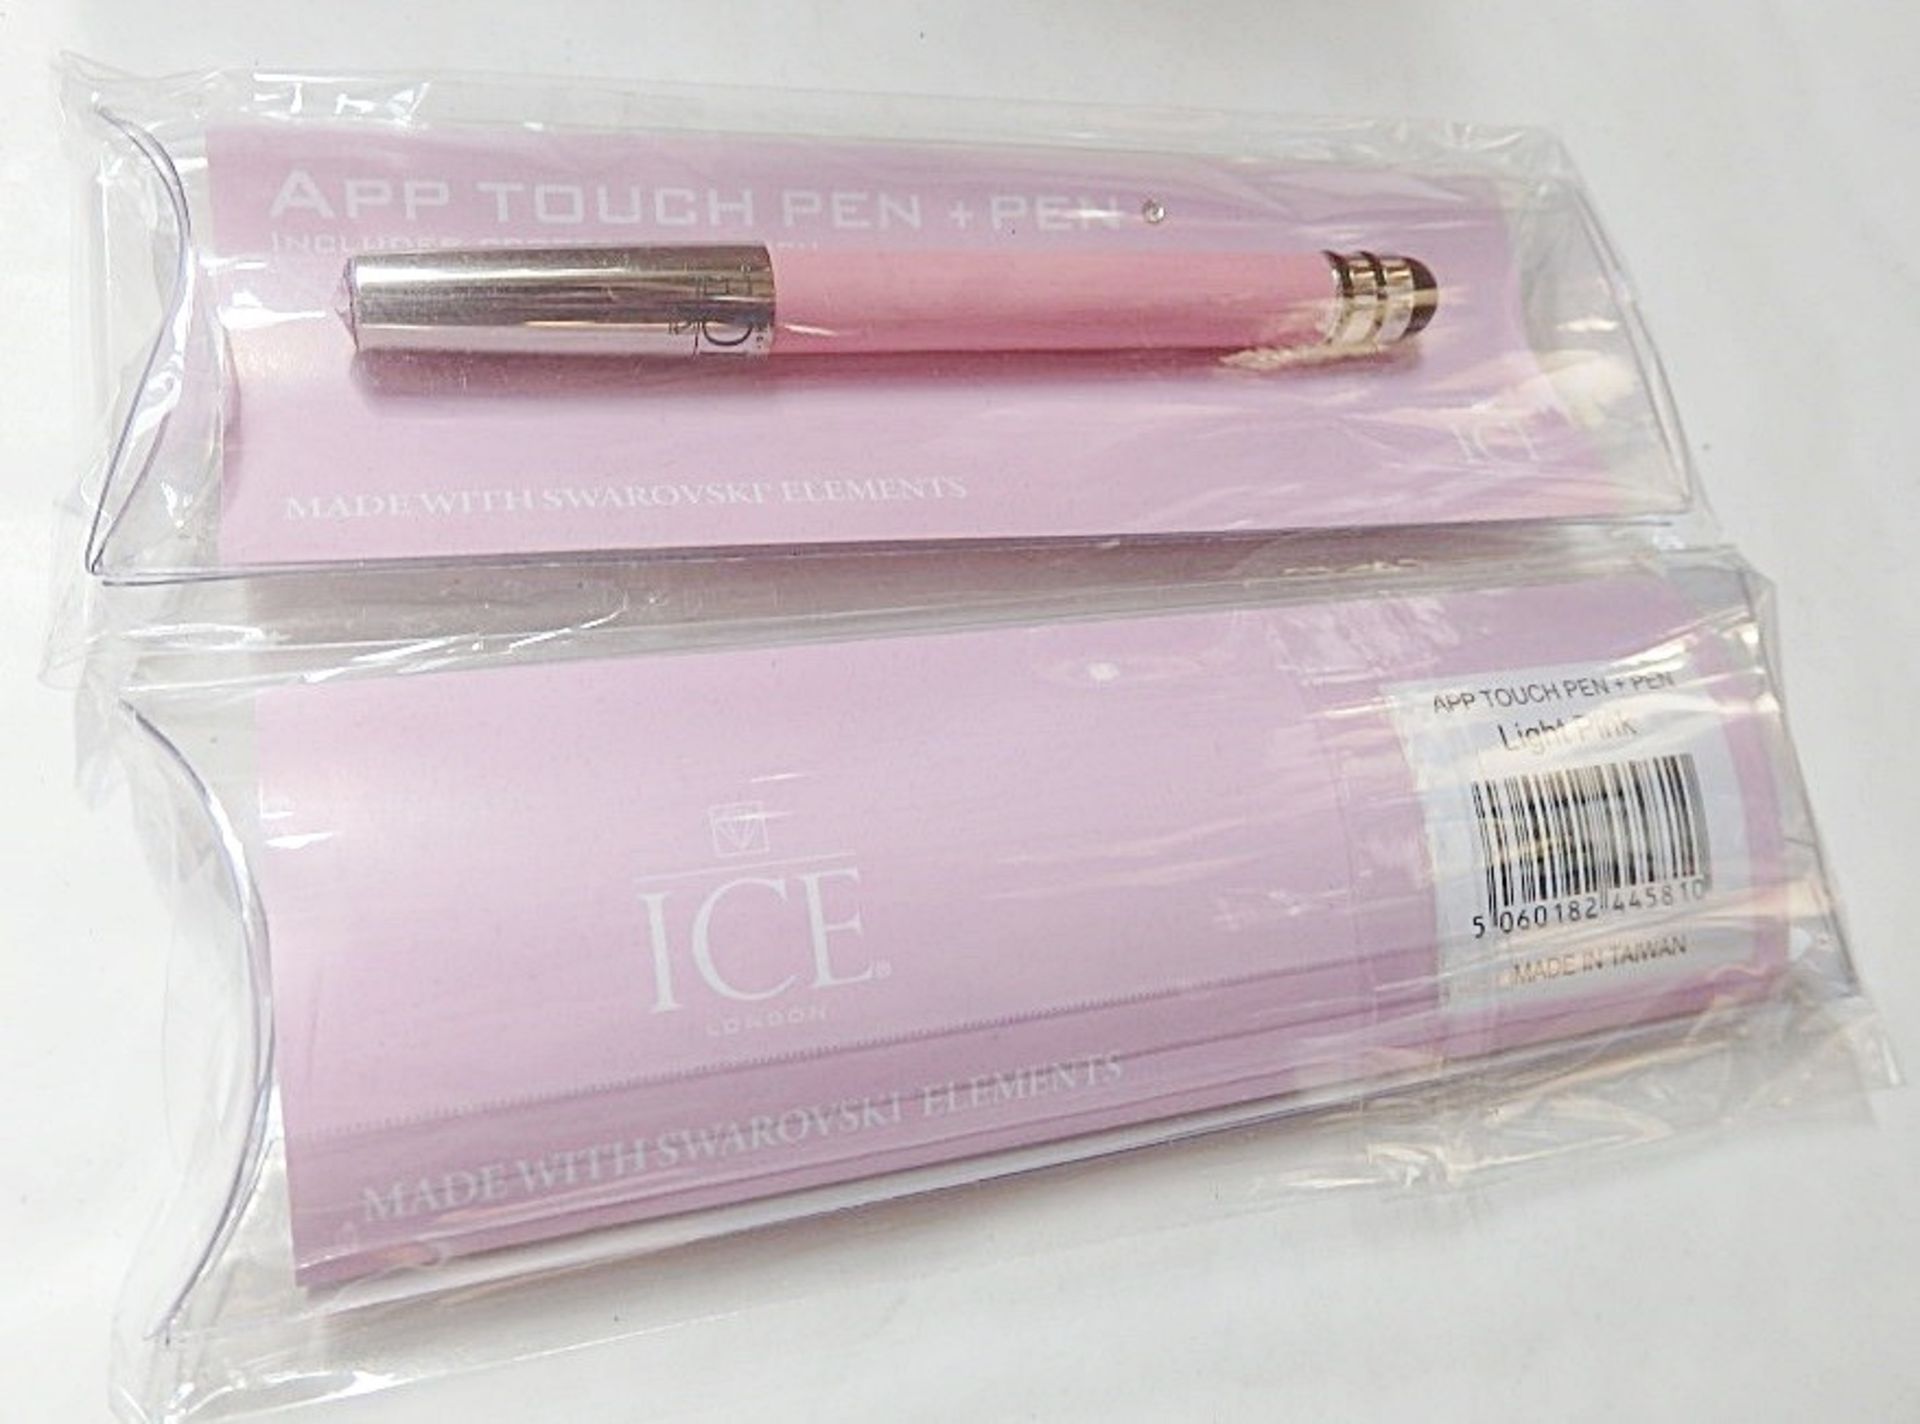 50 x ICE LONDON App Pen Duo - Touch Stylus And Ink Pen Combined - Colour: LIGHT PINK - MADE WITH - Image 3 of 5